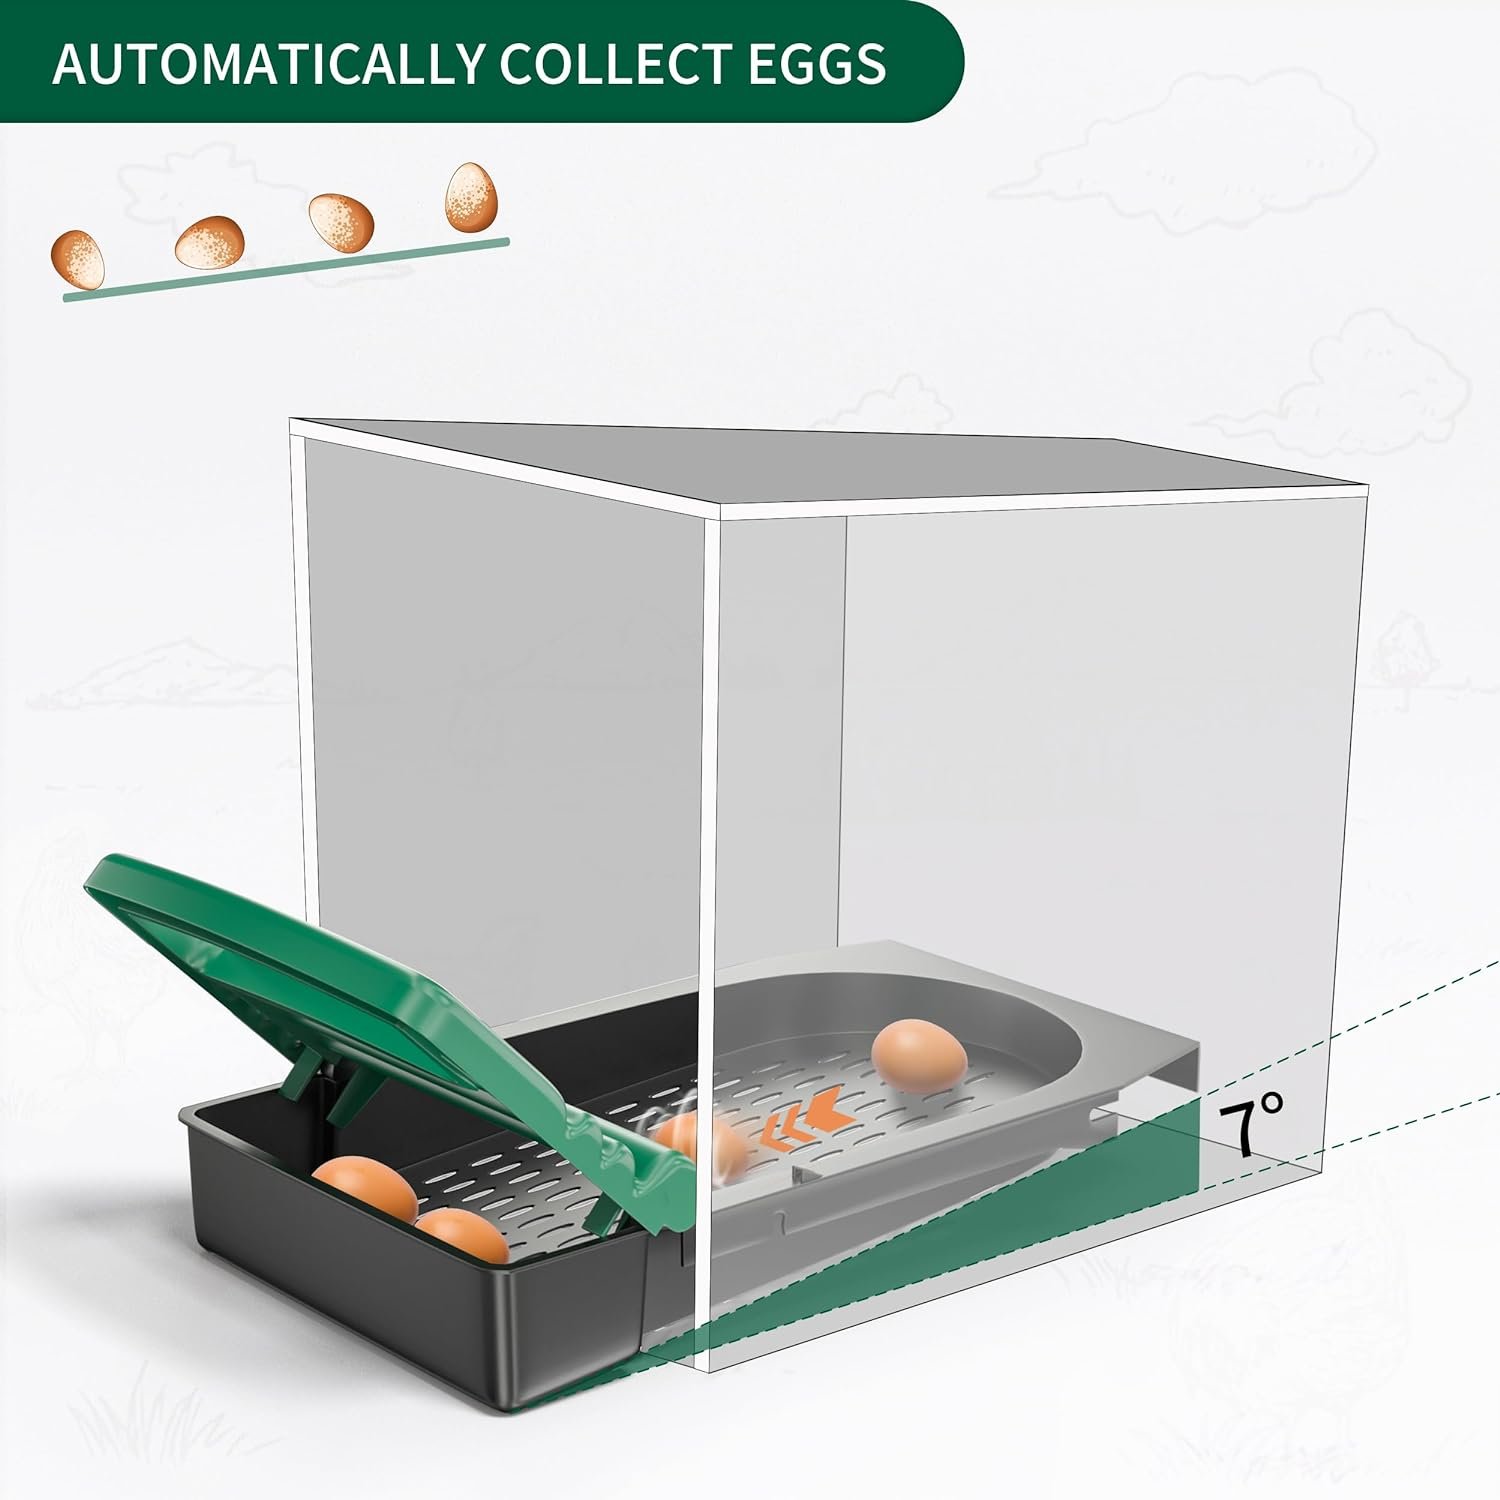 TOETOL Chicken Nesting Boxes - 2 Hole Metal Chicken Egg Laying Heavy Duty Nest Box for Chicken and Poultry with Lid Cover to Protect Eggs